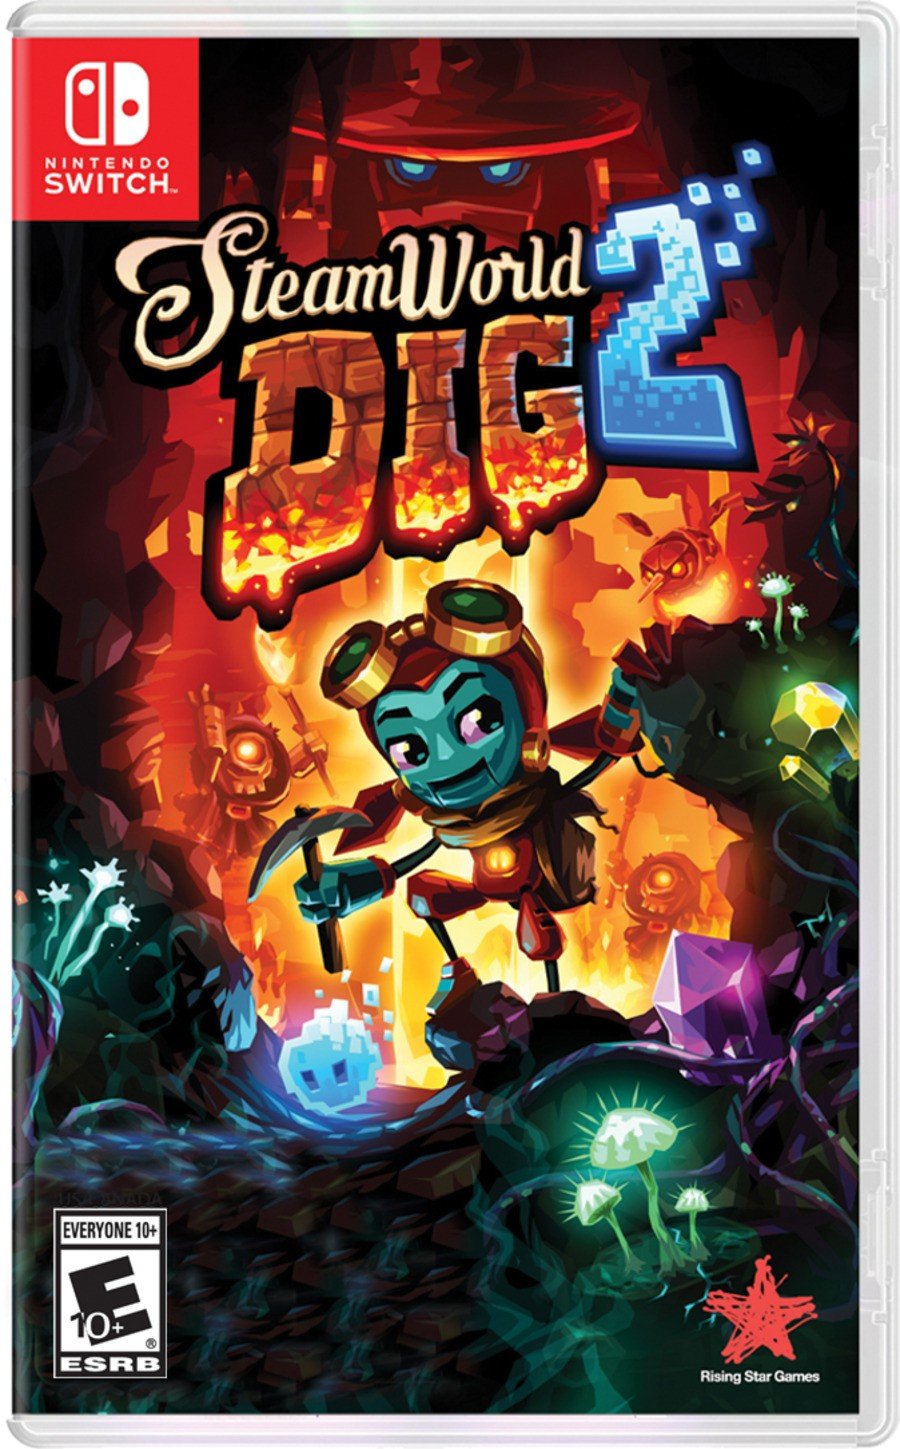 SteamWorld Dig 2 headlines this weekend's Free Play Days games